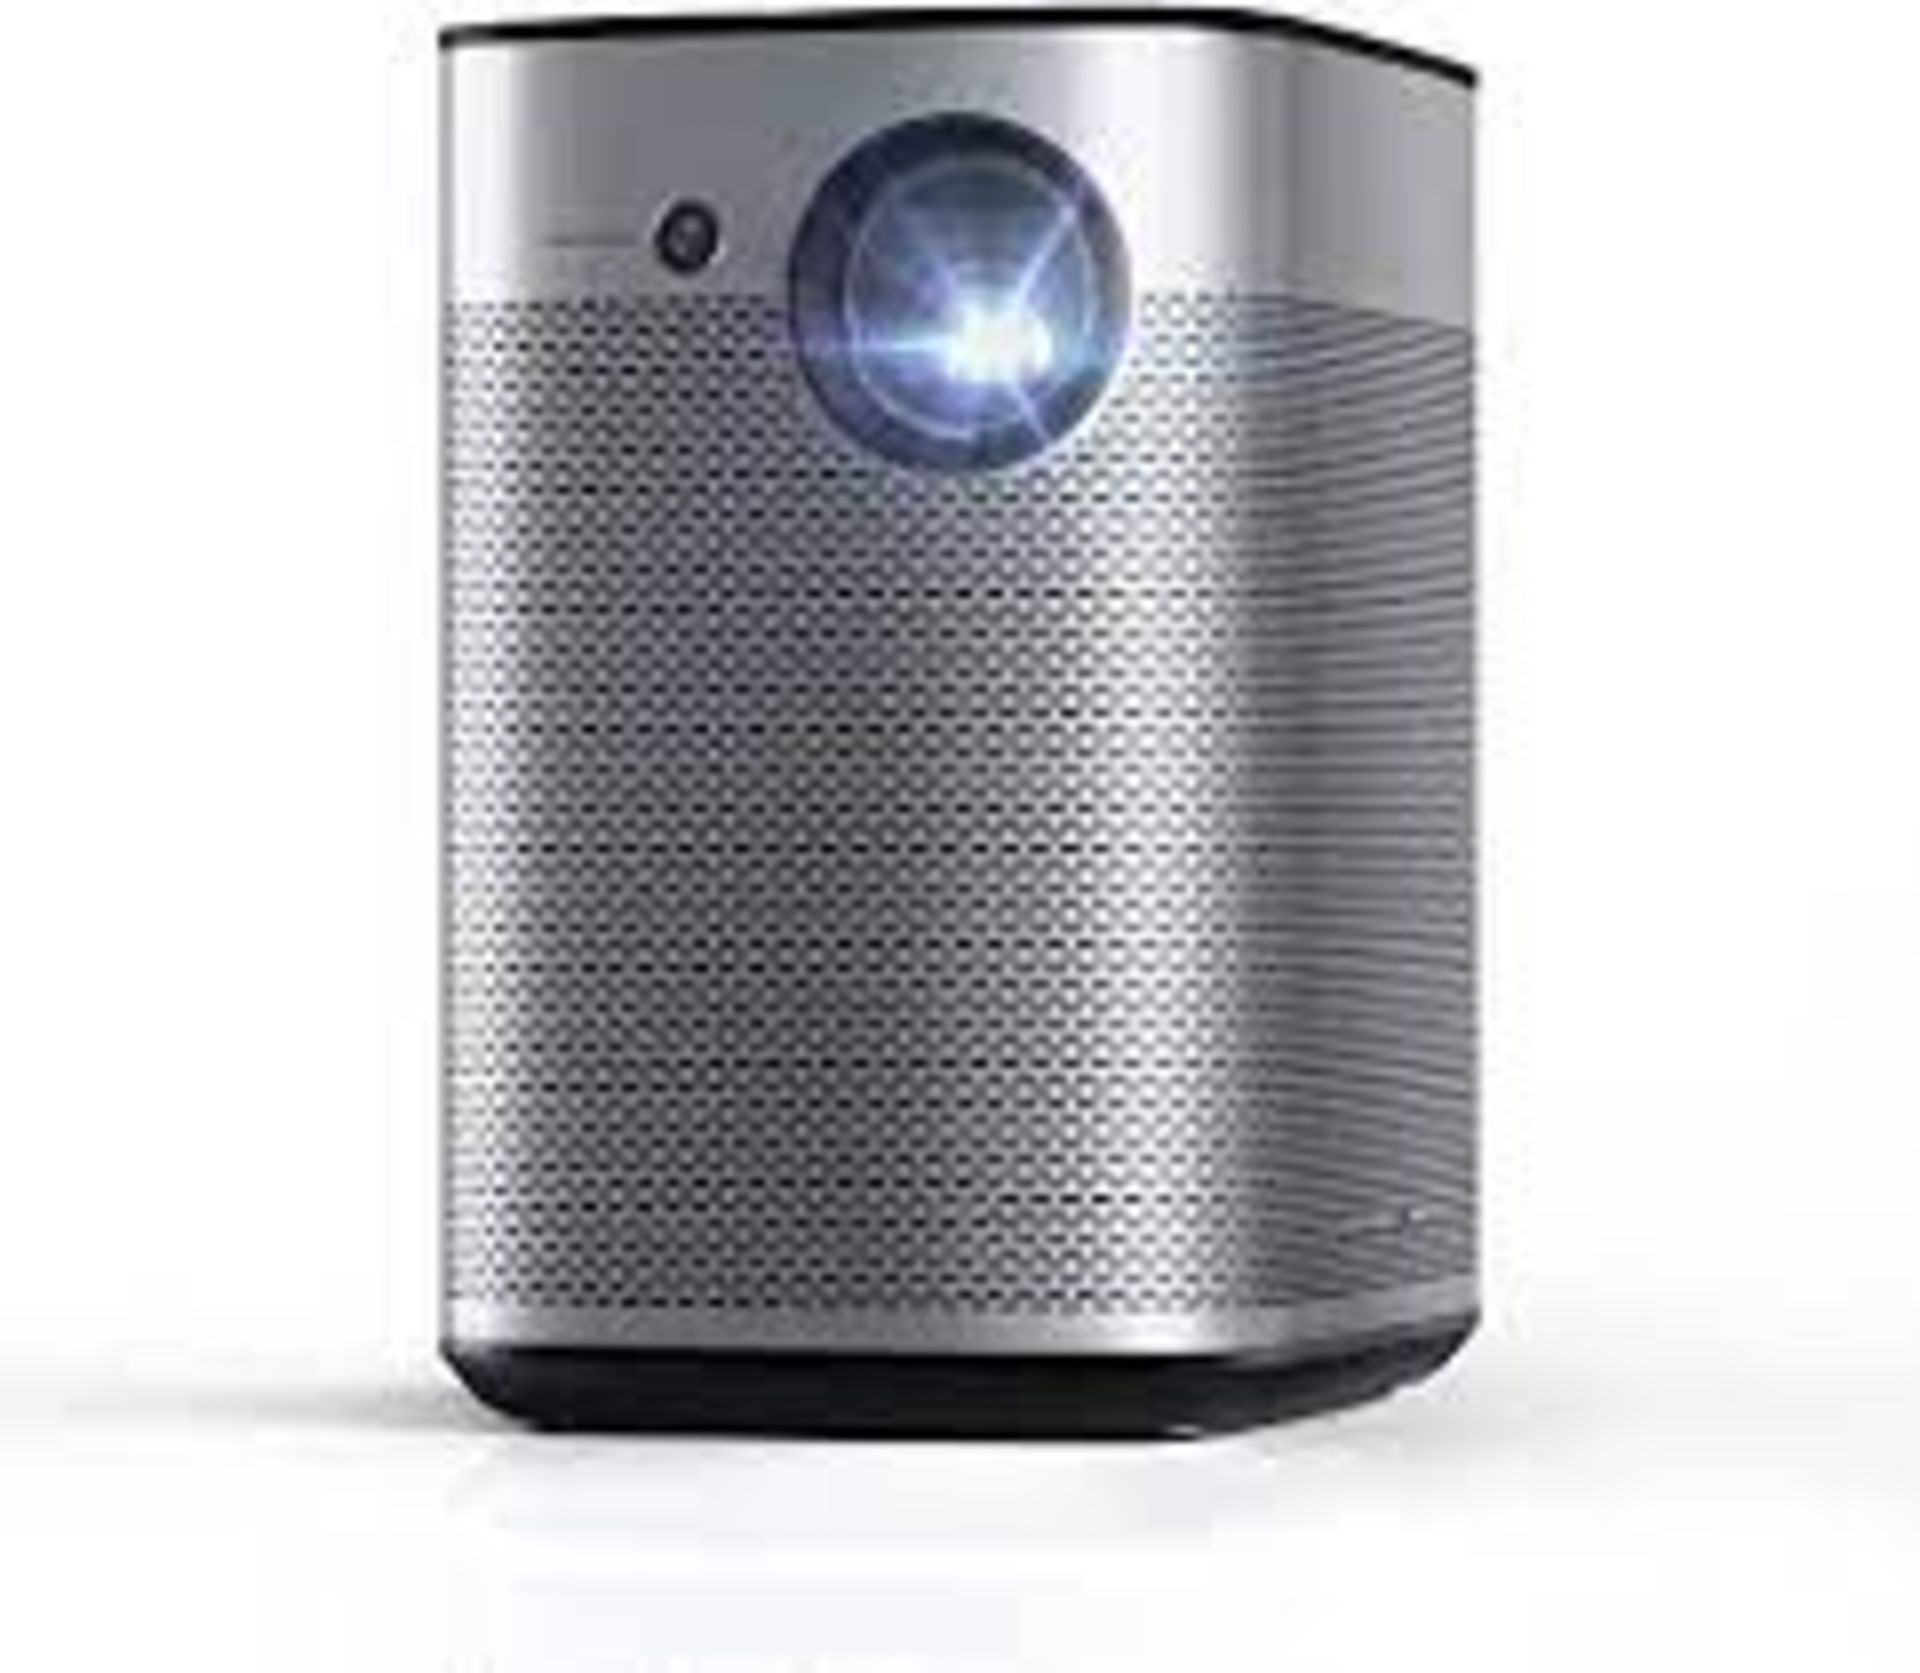 RRP £629.99 XGIMI Halo 1080p Portable Projector for Outdoor Movie Night, 800 ANSI Lumen, Harman Kard